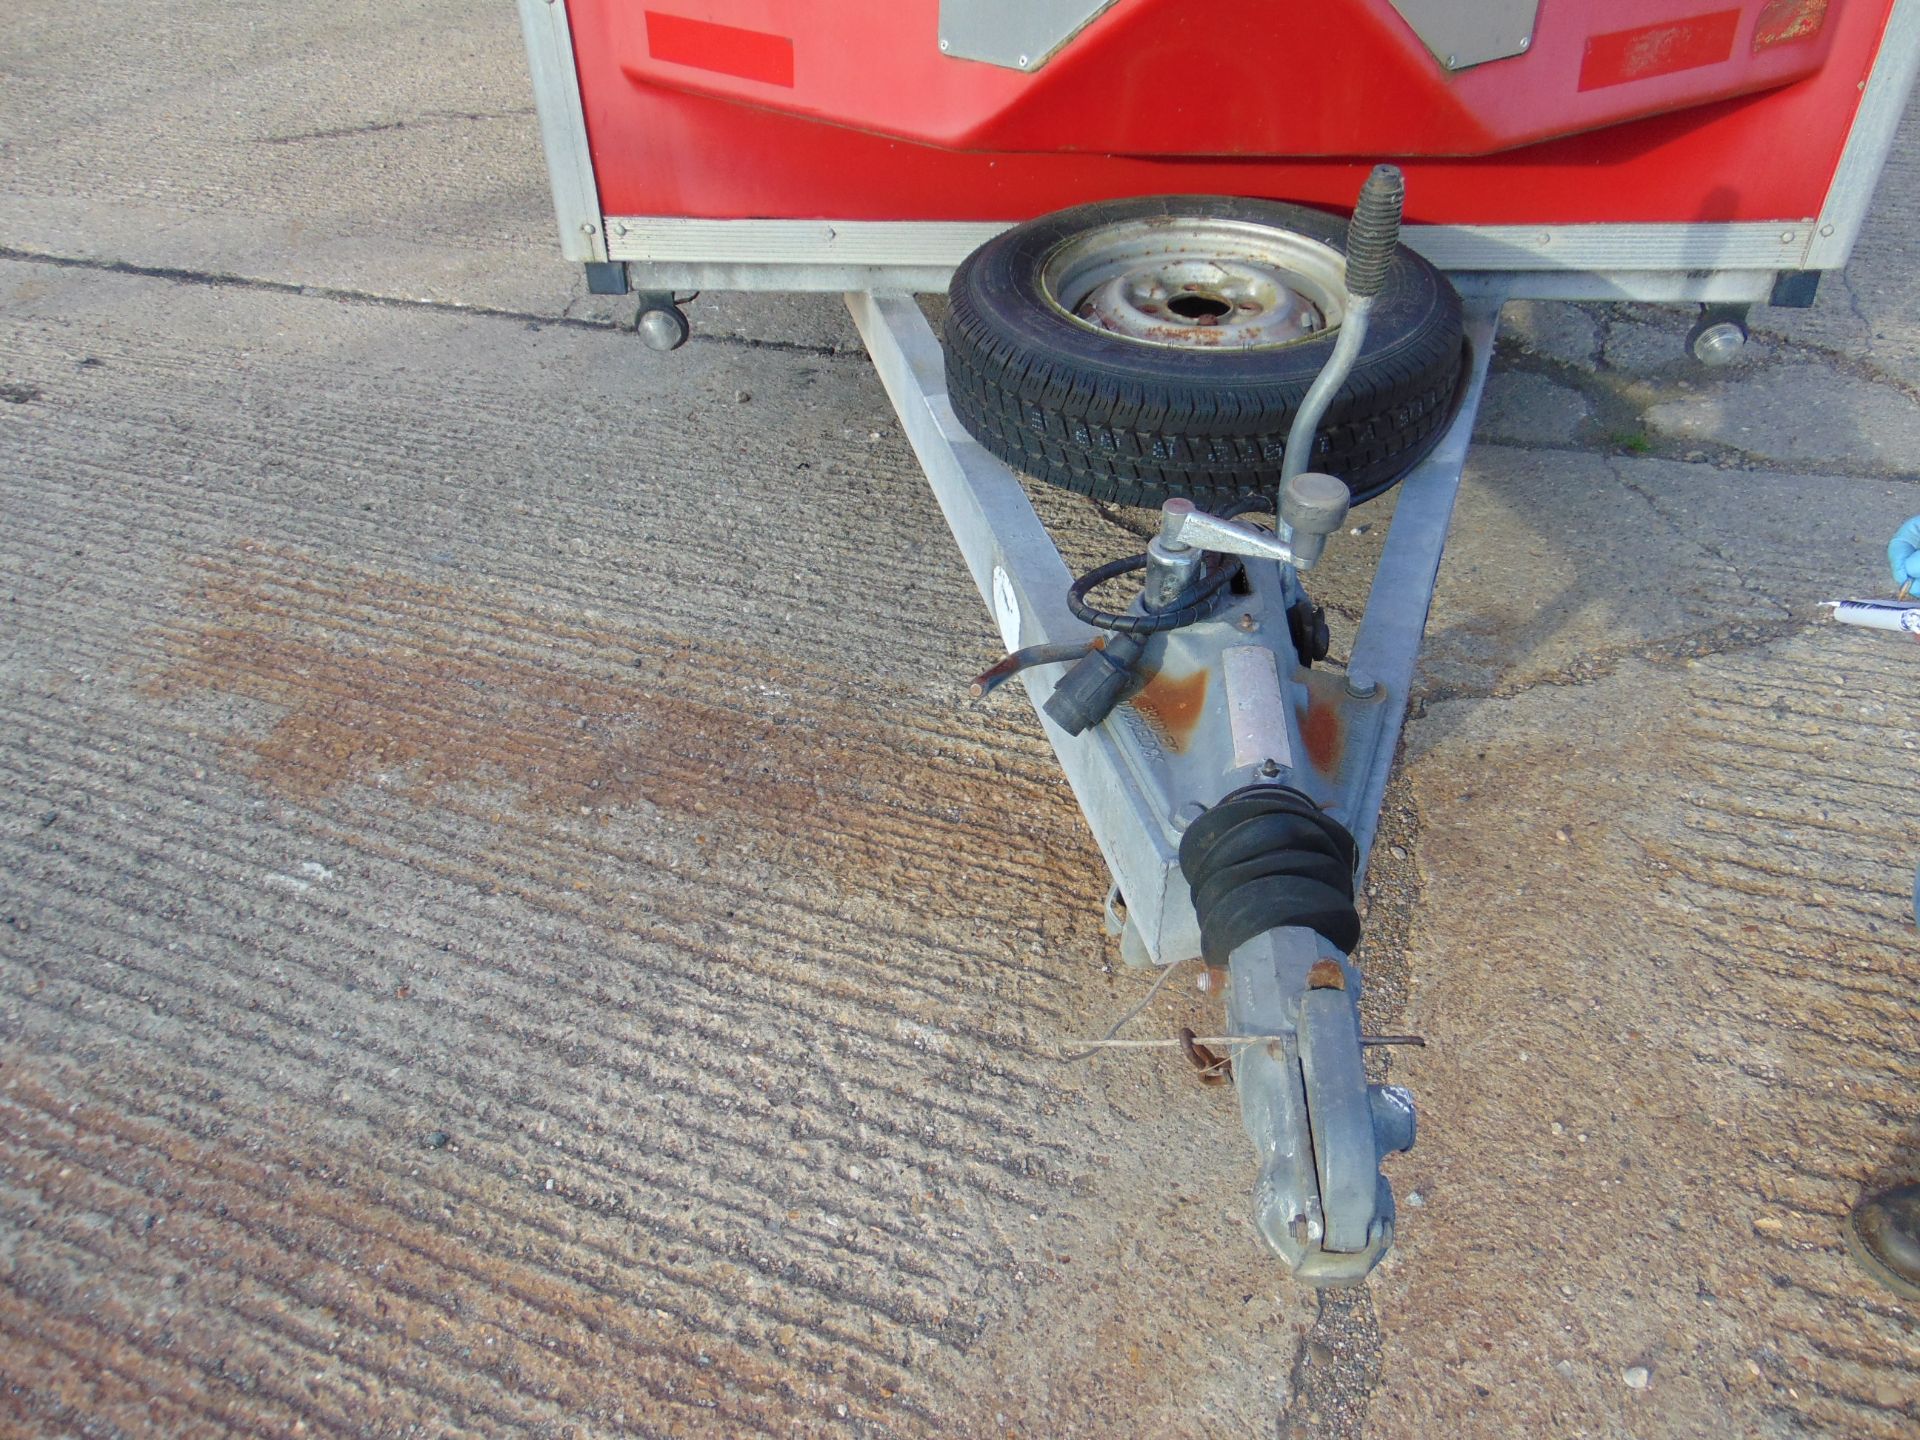 From UK Fire & Rescue Bingham 2 axle Show Trailer c/w spare wheel etc - Image 13 of 13